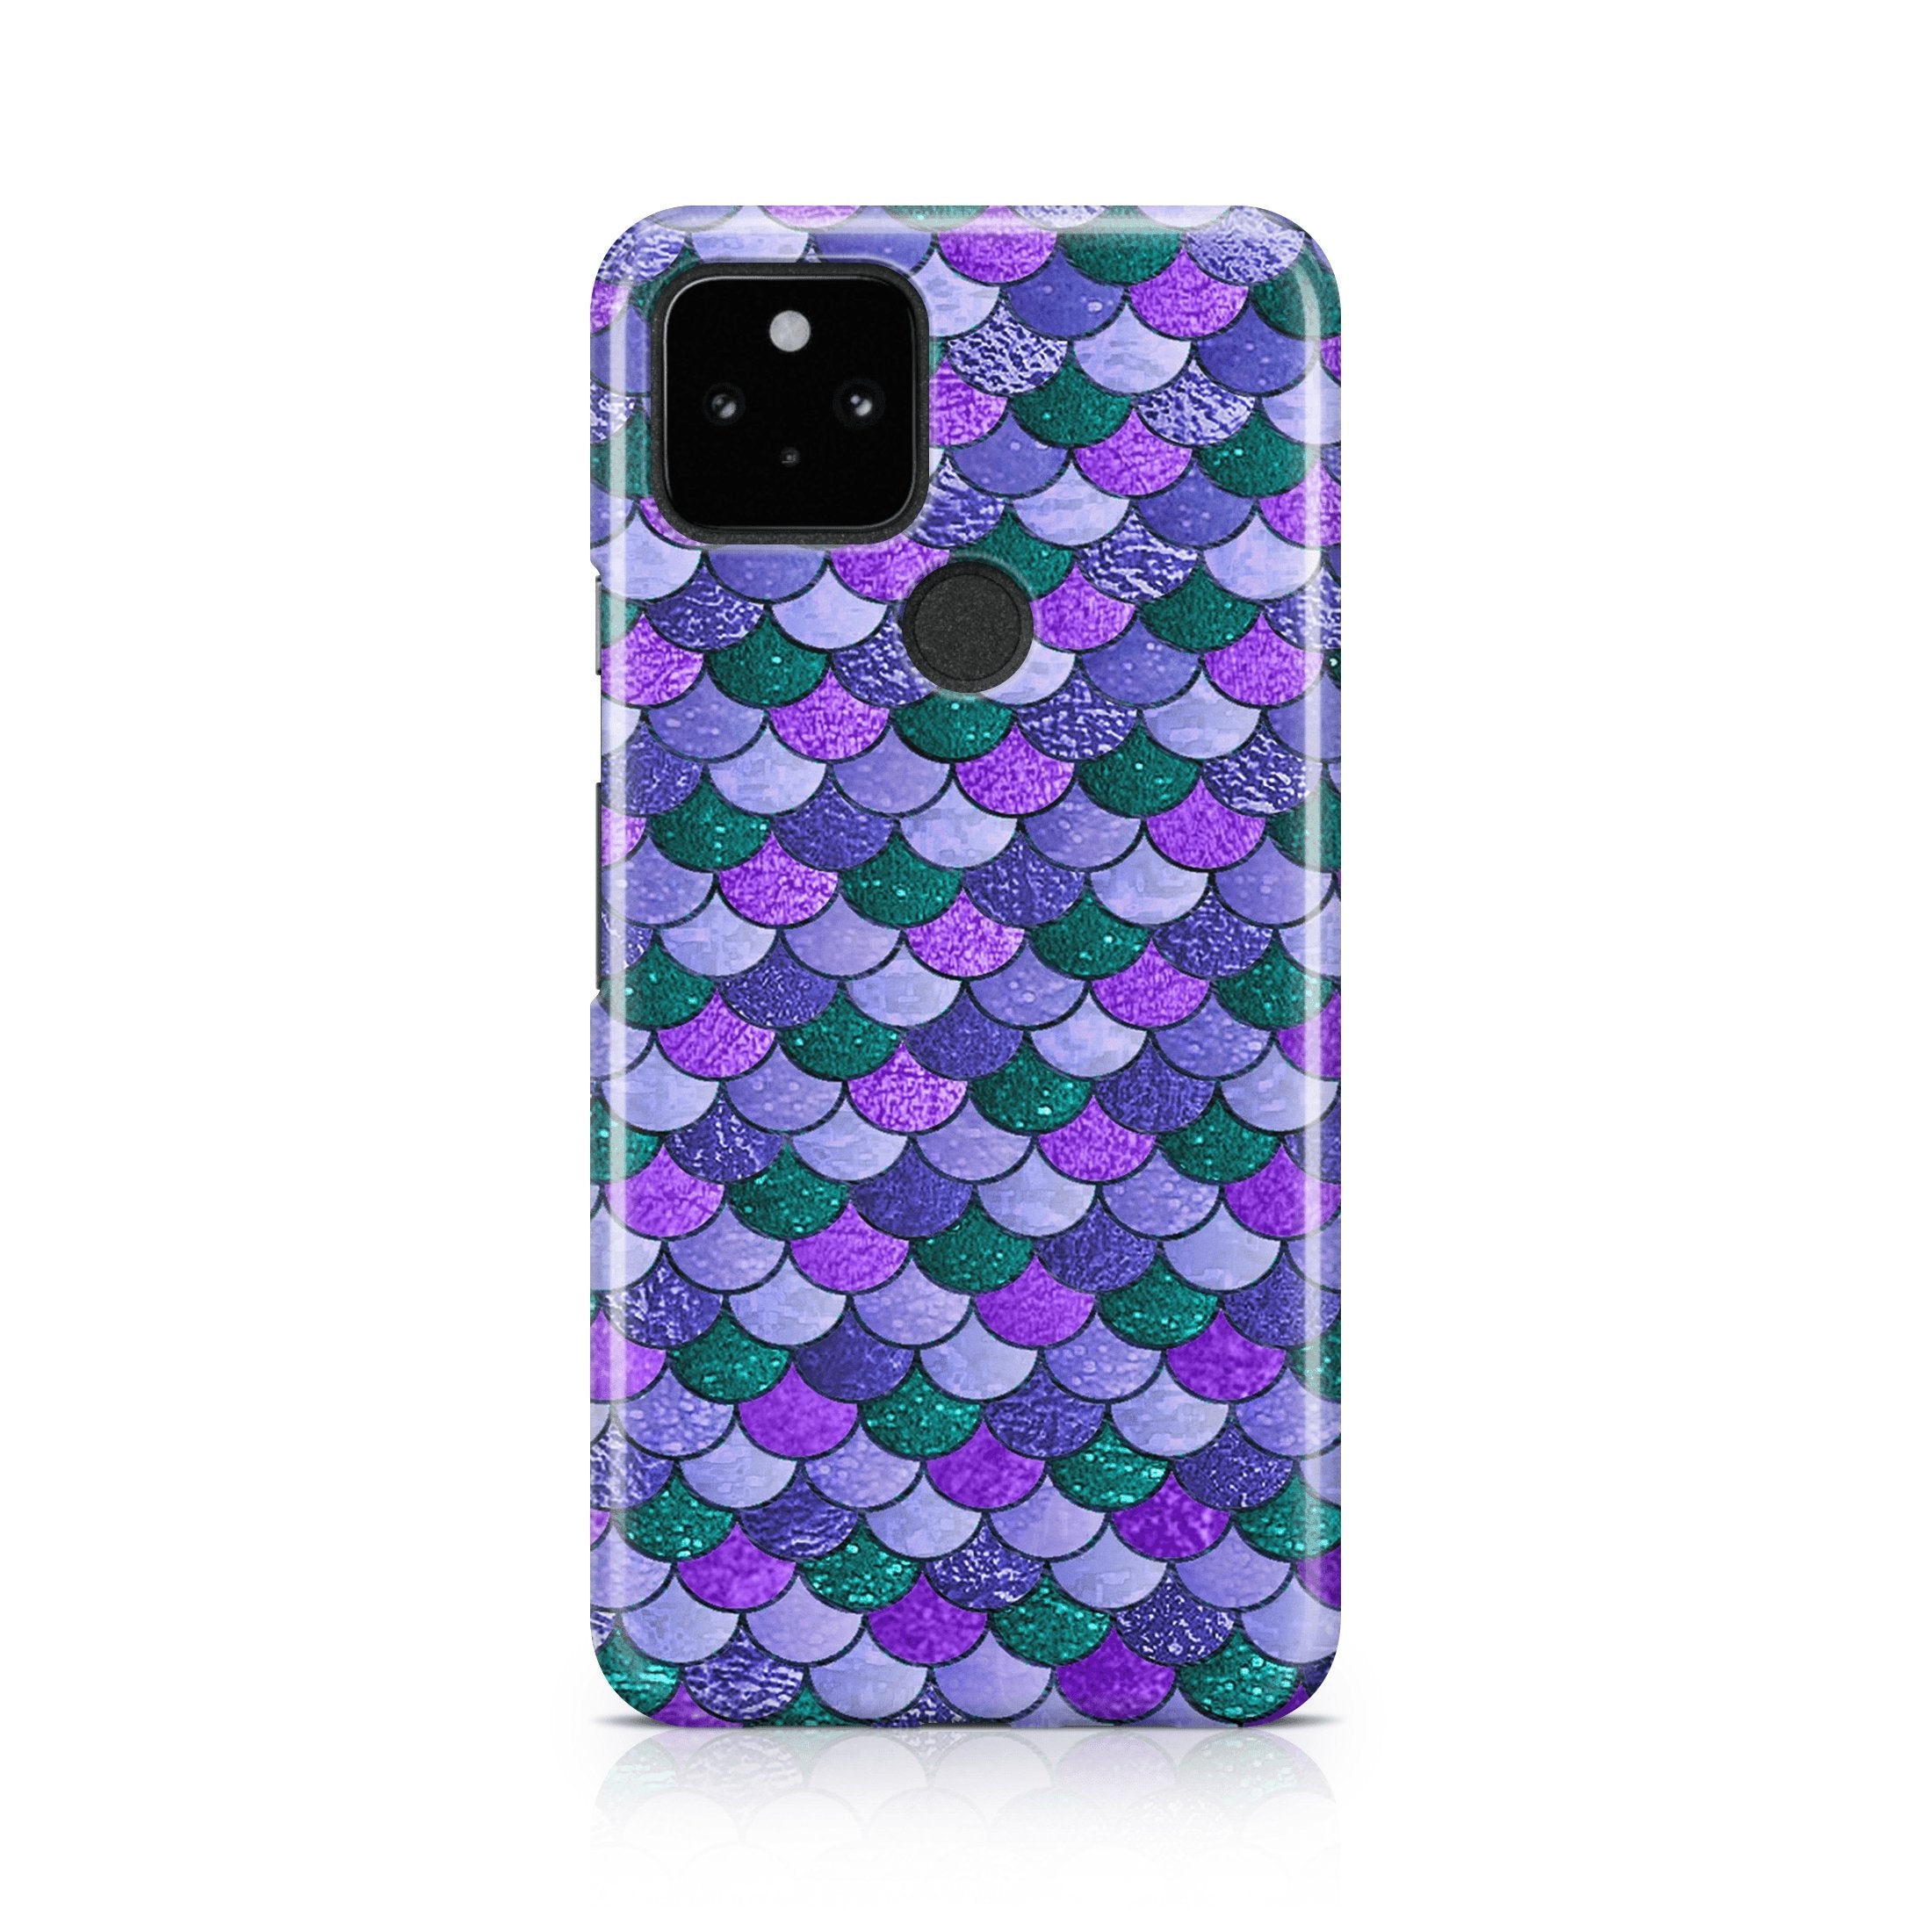 Purple Mermaid Scale - Google phone case designs by CaseSwagger